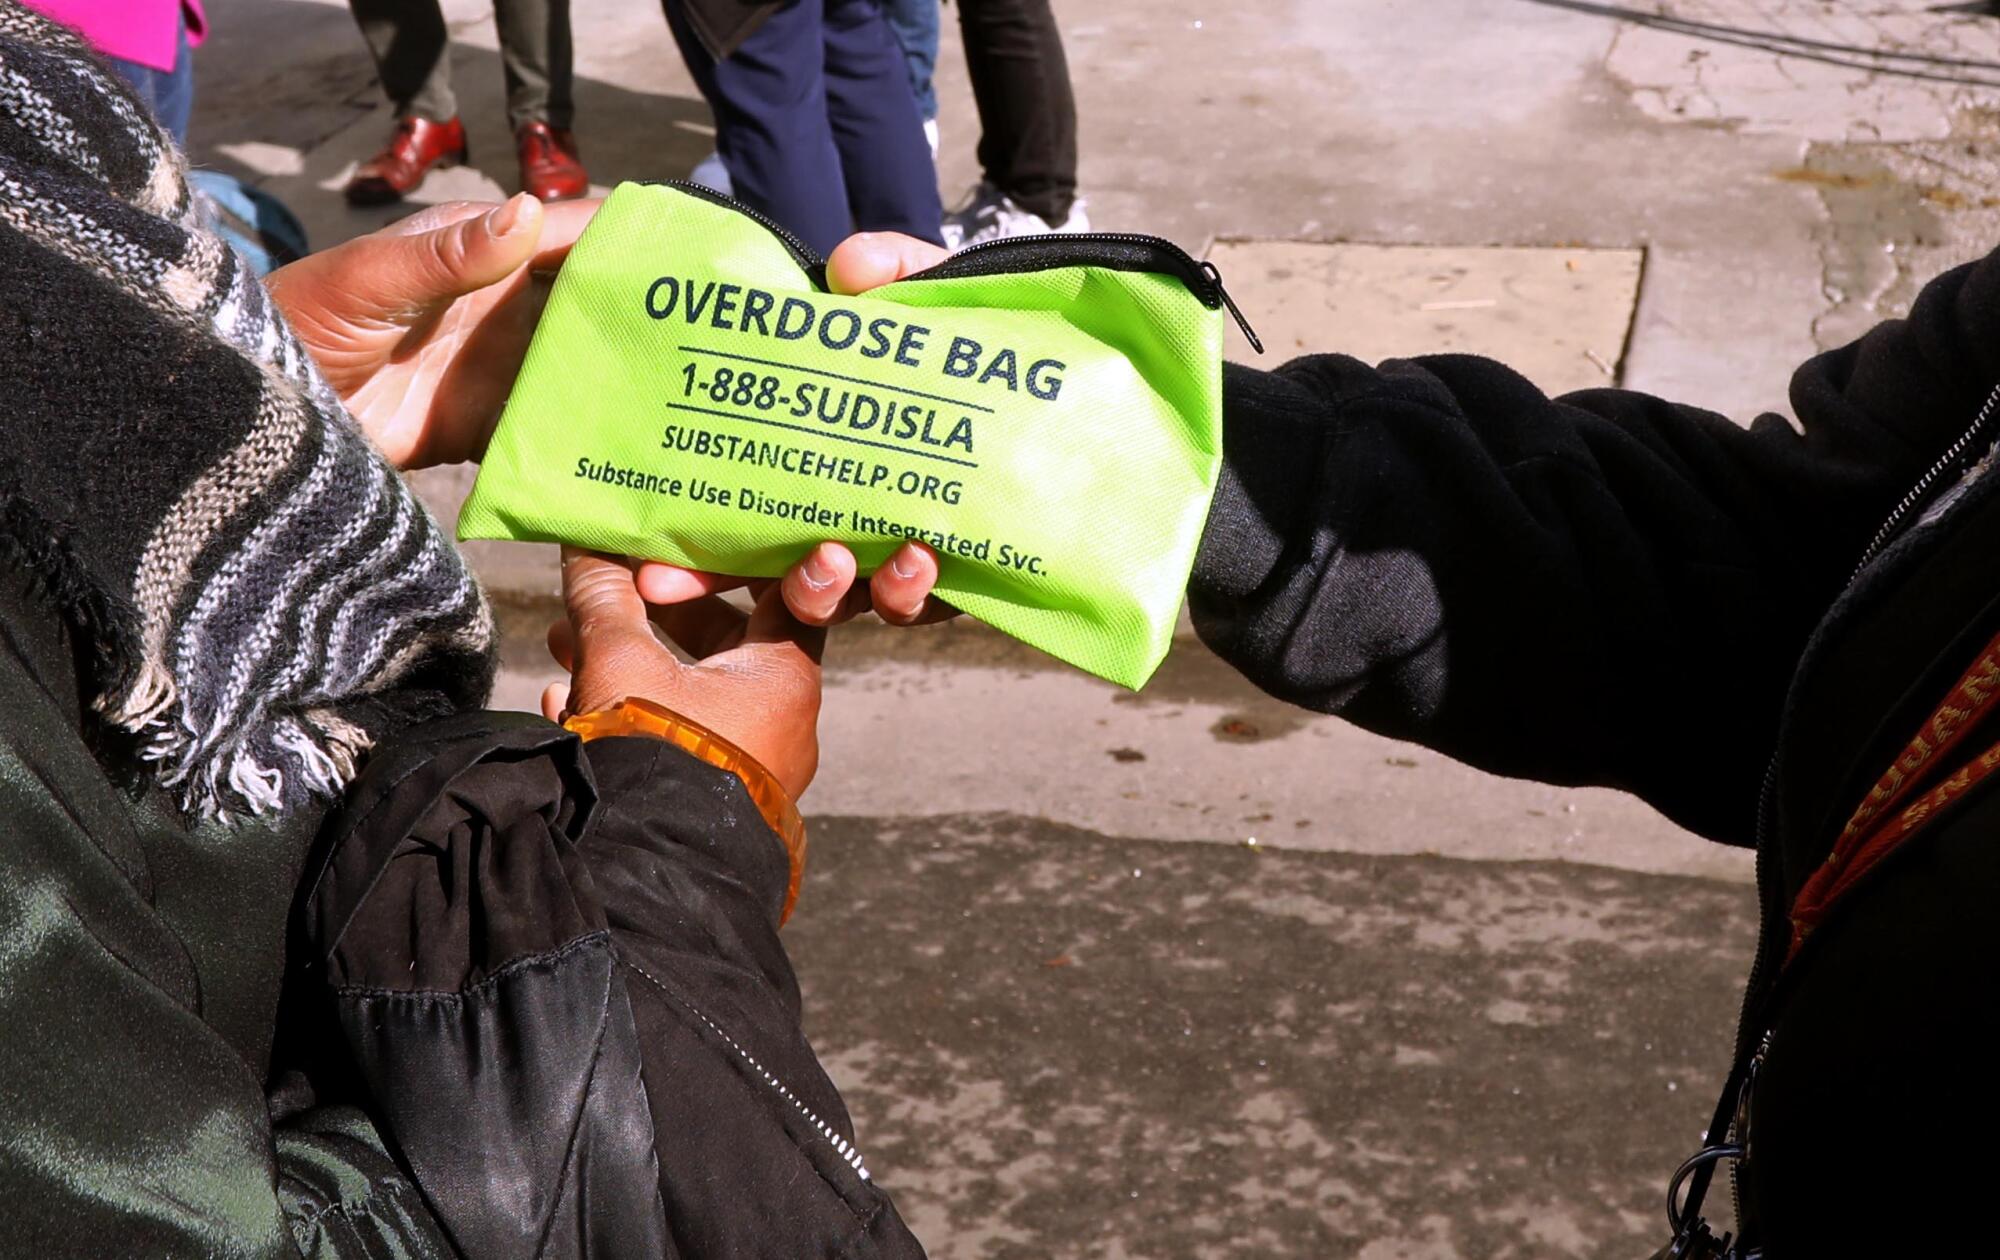 Overdose bags contain Naloxone, a medication designed to reverse an opioid overdose, were distributed.